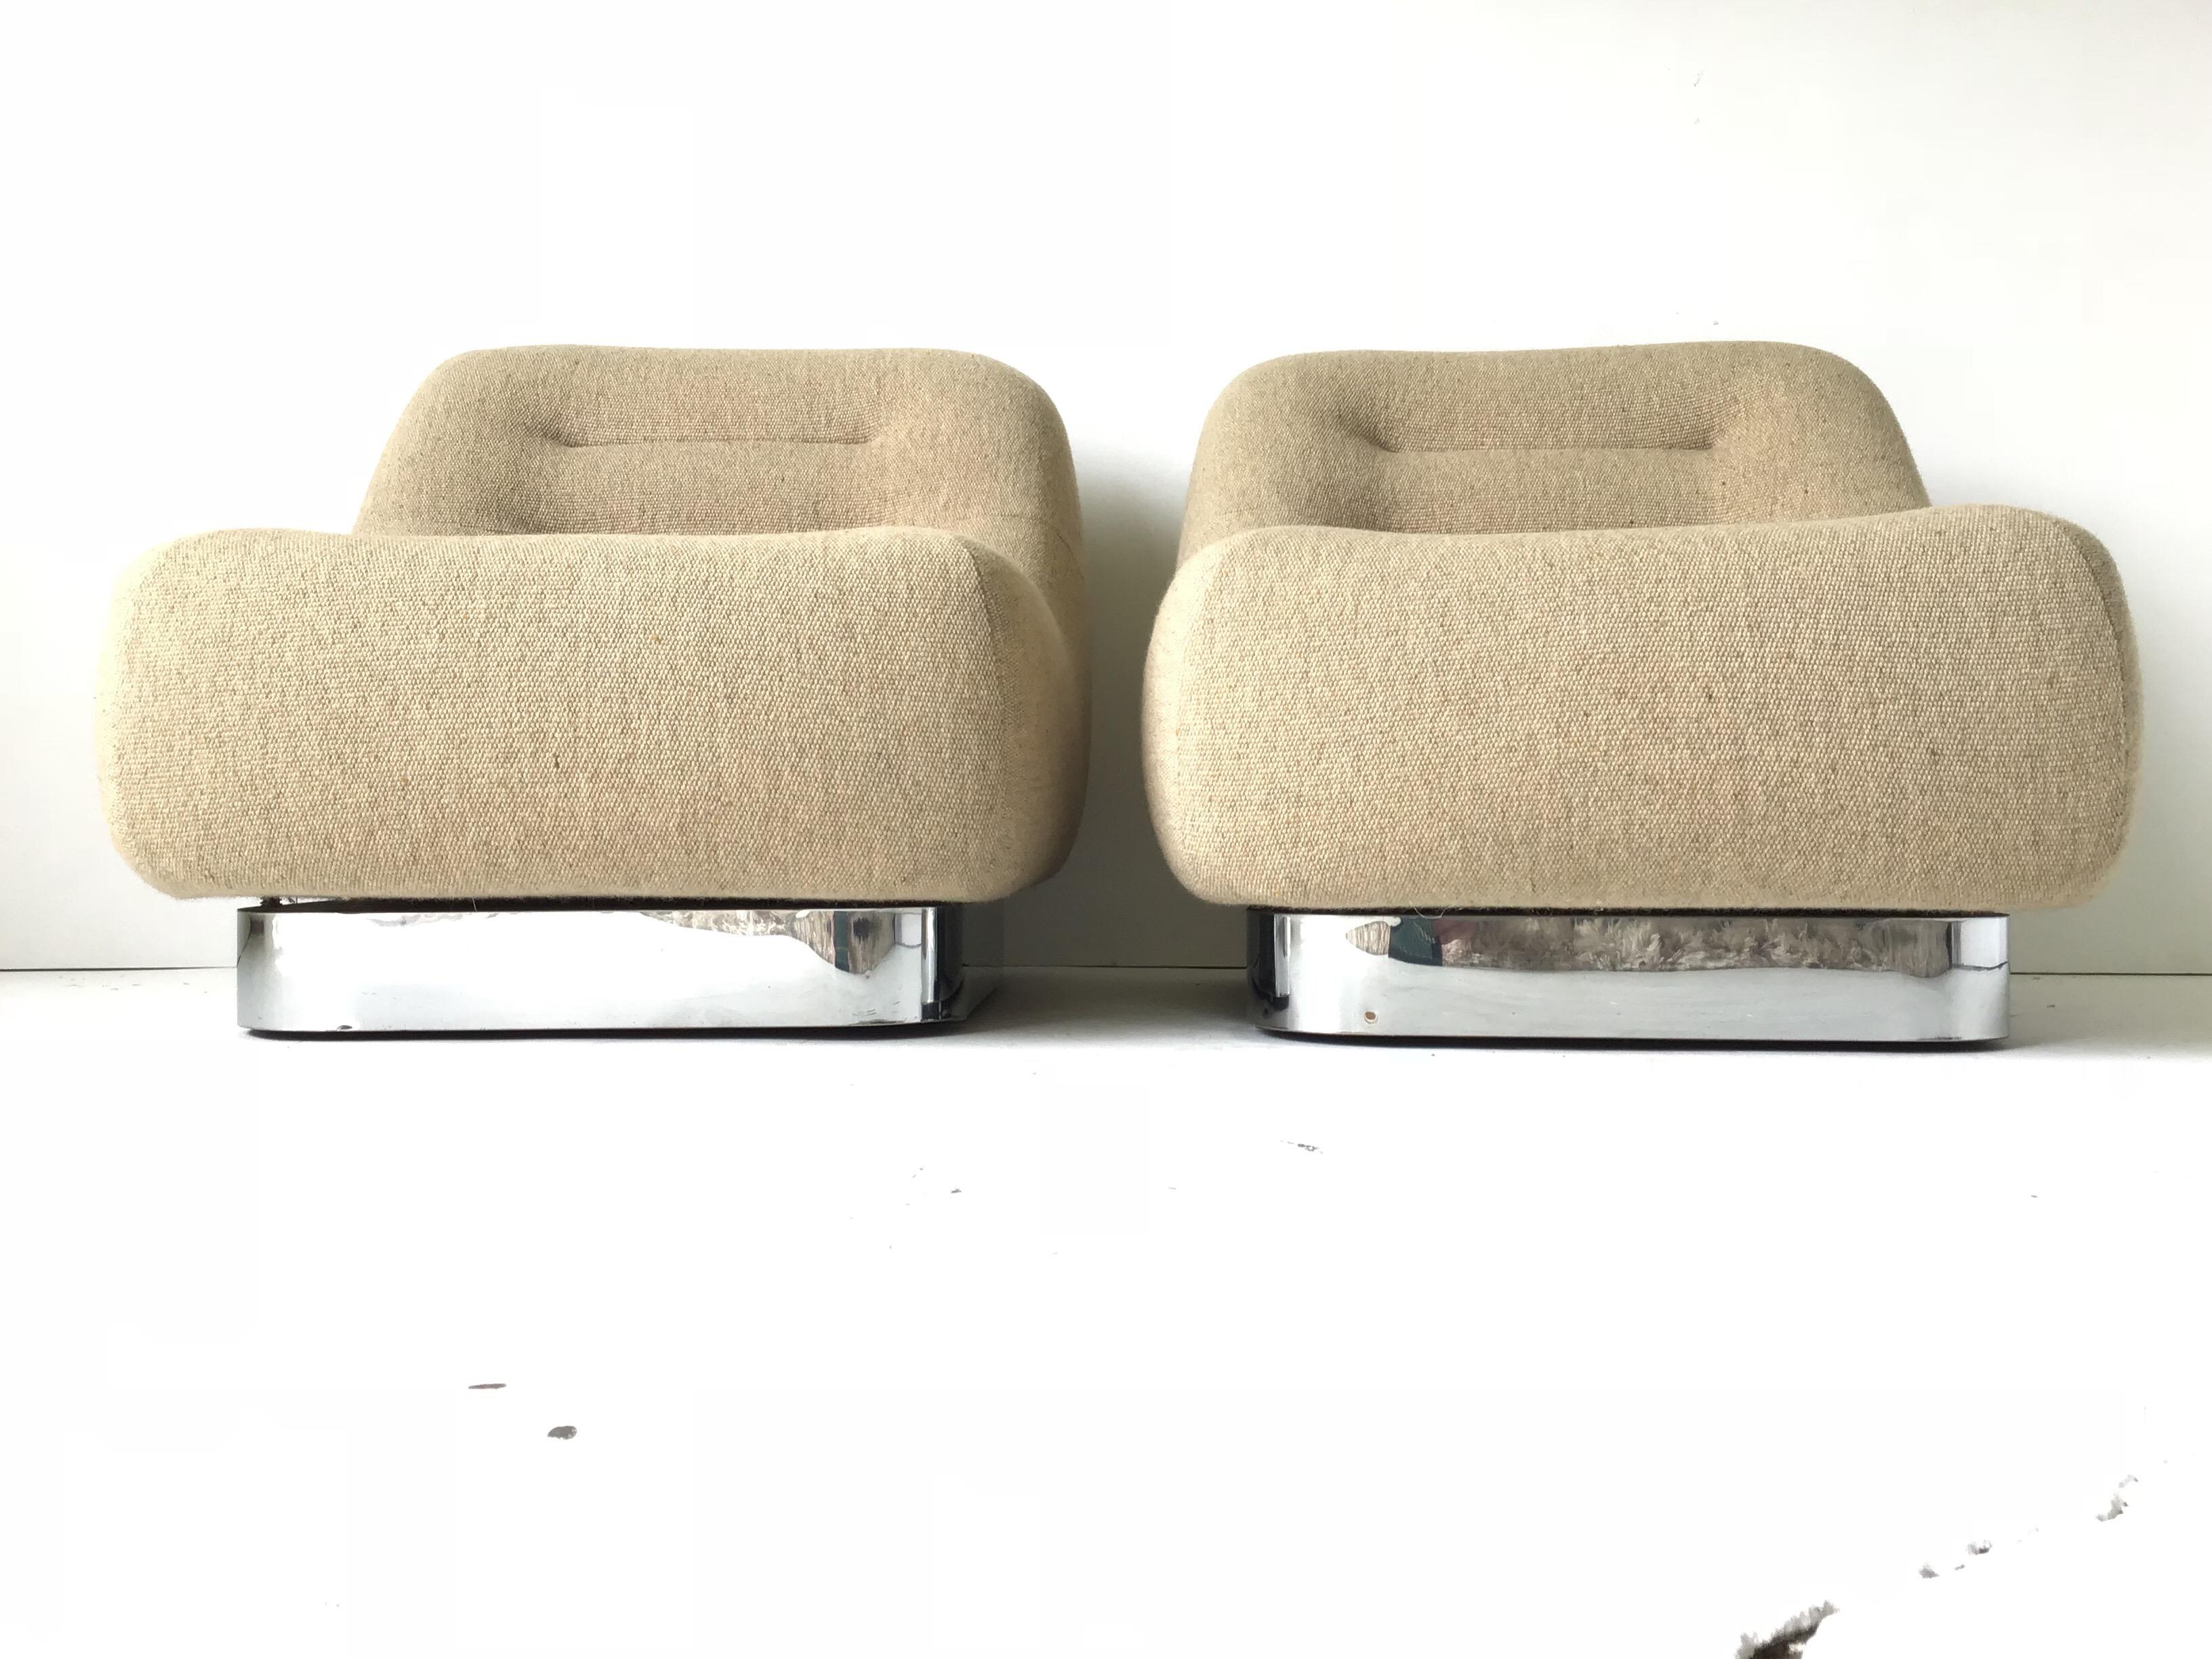 This is an absolutely fantastic pair of low lounge chairs. These obscure lounges are very sculptural sort of Space Age in design. They rest upon chrome plinths. They retain their original tan wool weave fabric. The “Tomorrow” collection is